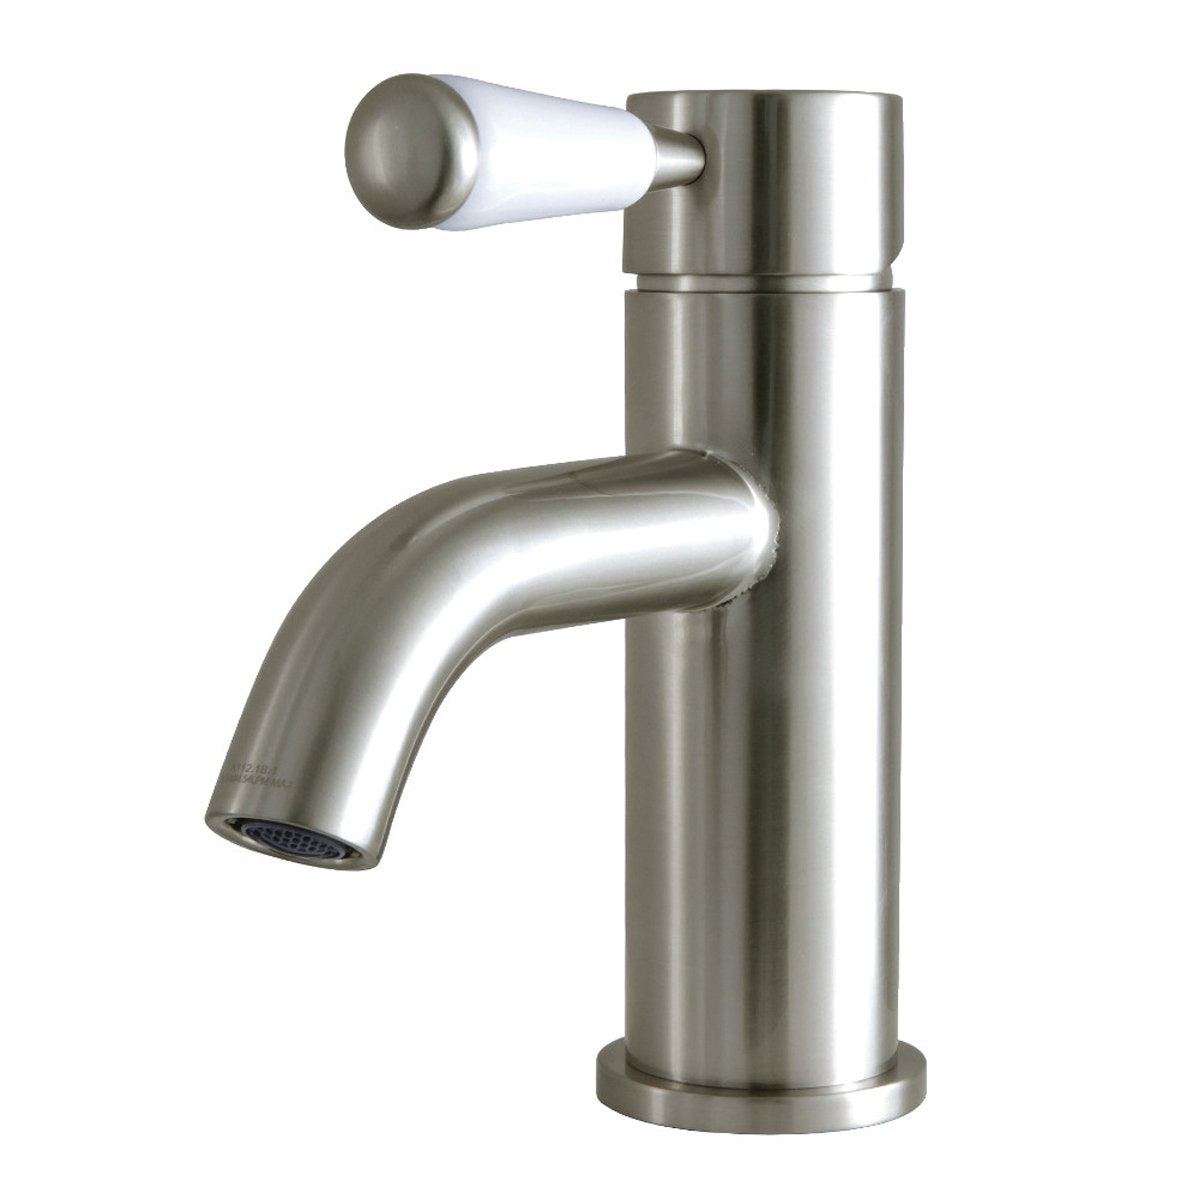 Kingston Brass Fauceture Paris Single-Handle Bathroom Faucet with Drain and Deck Plate